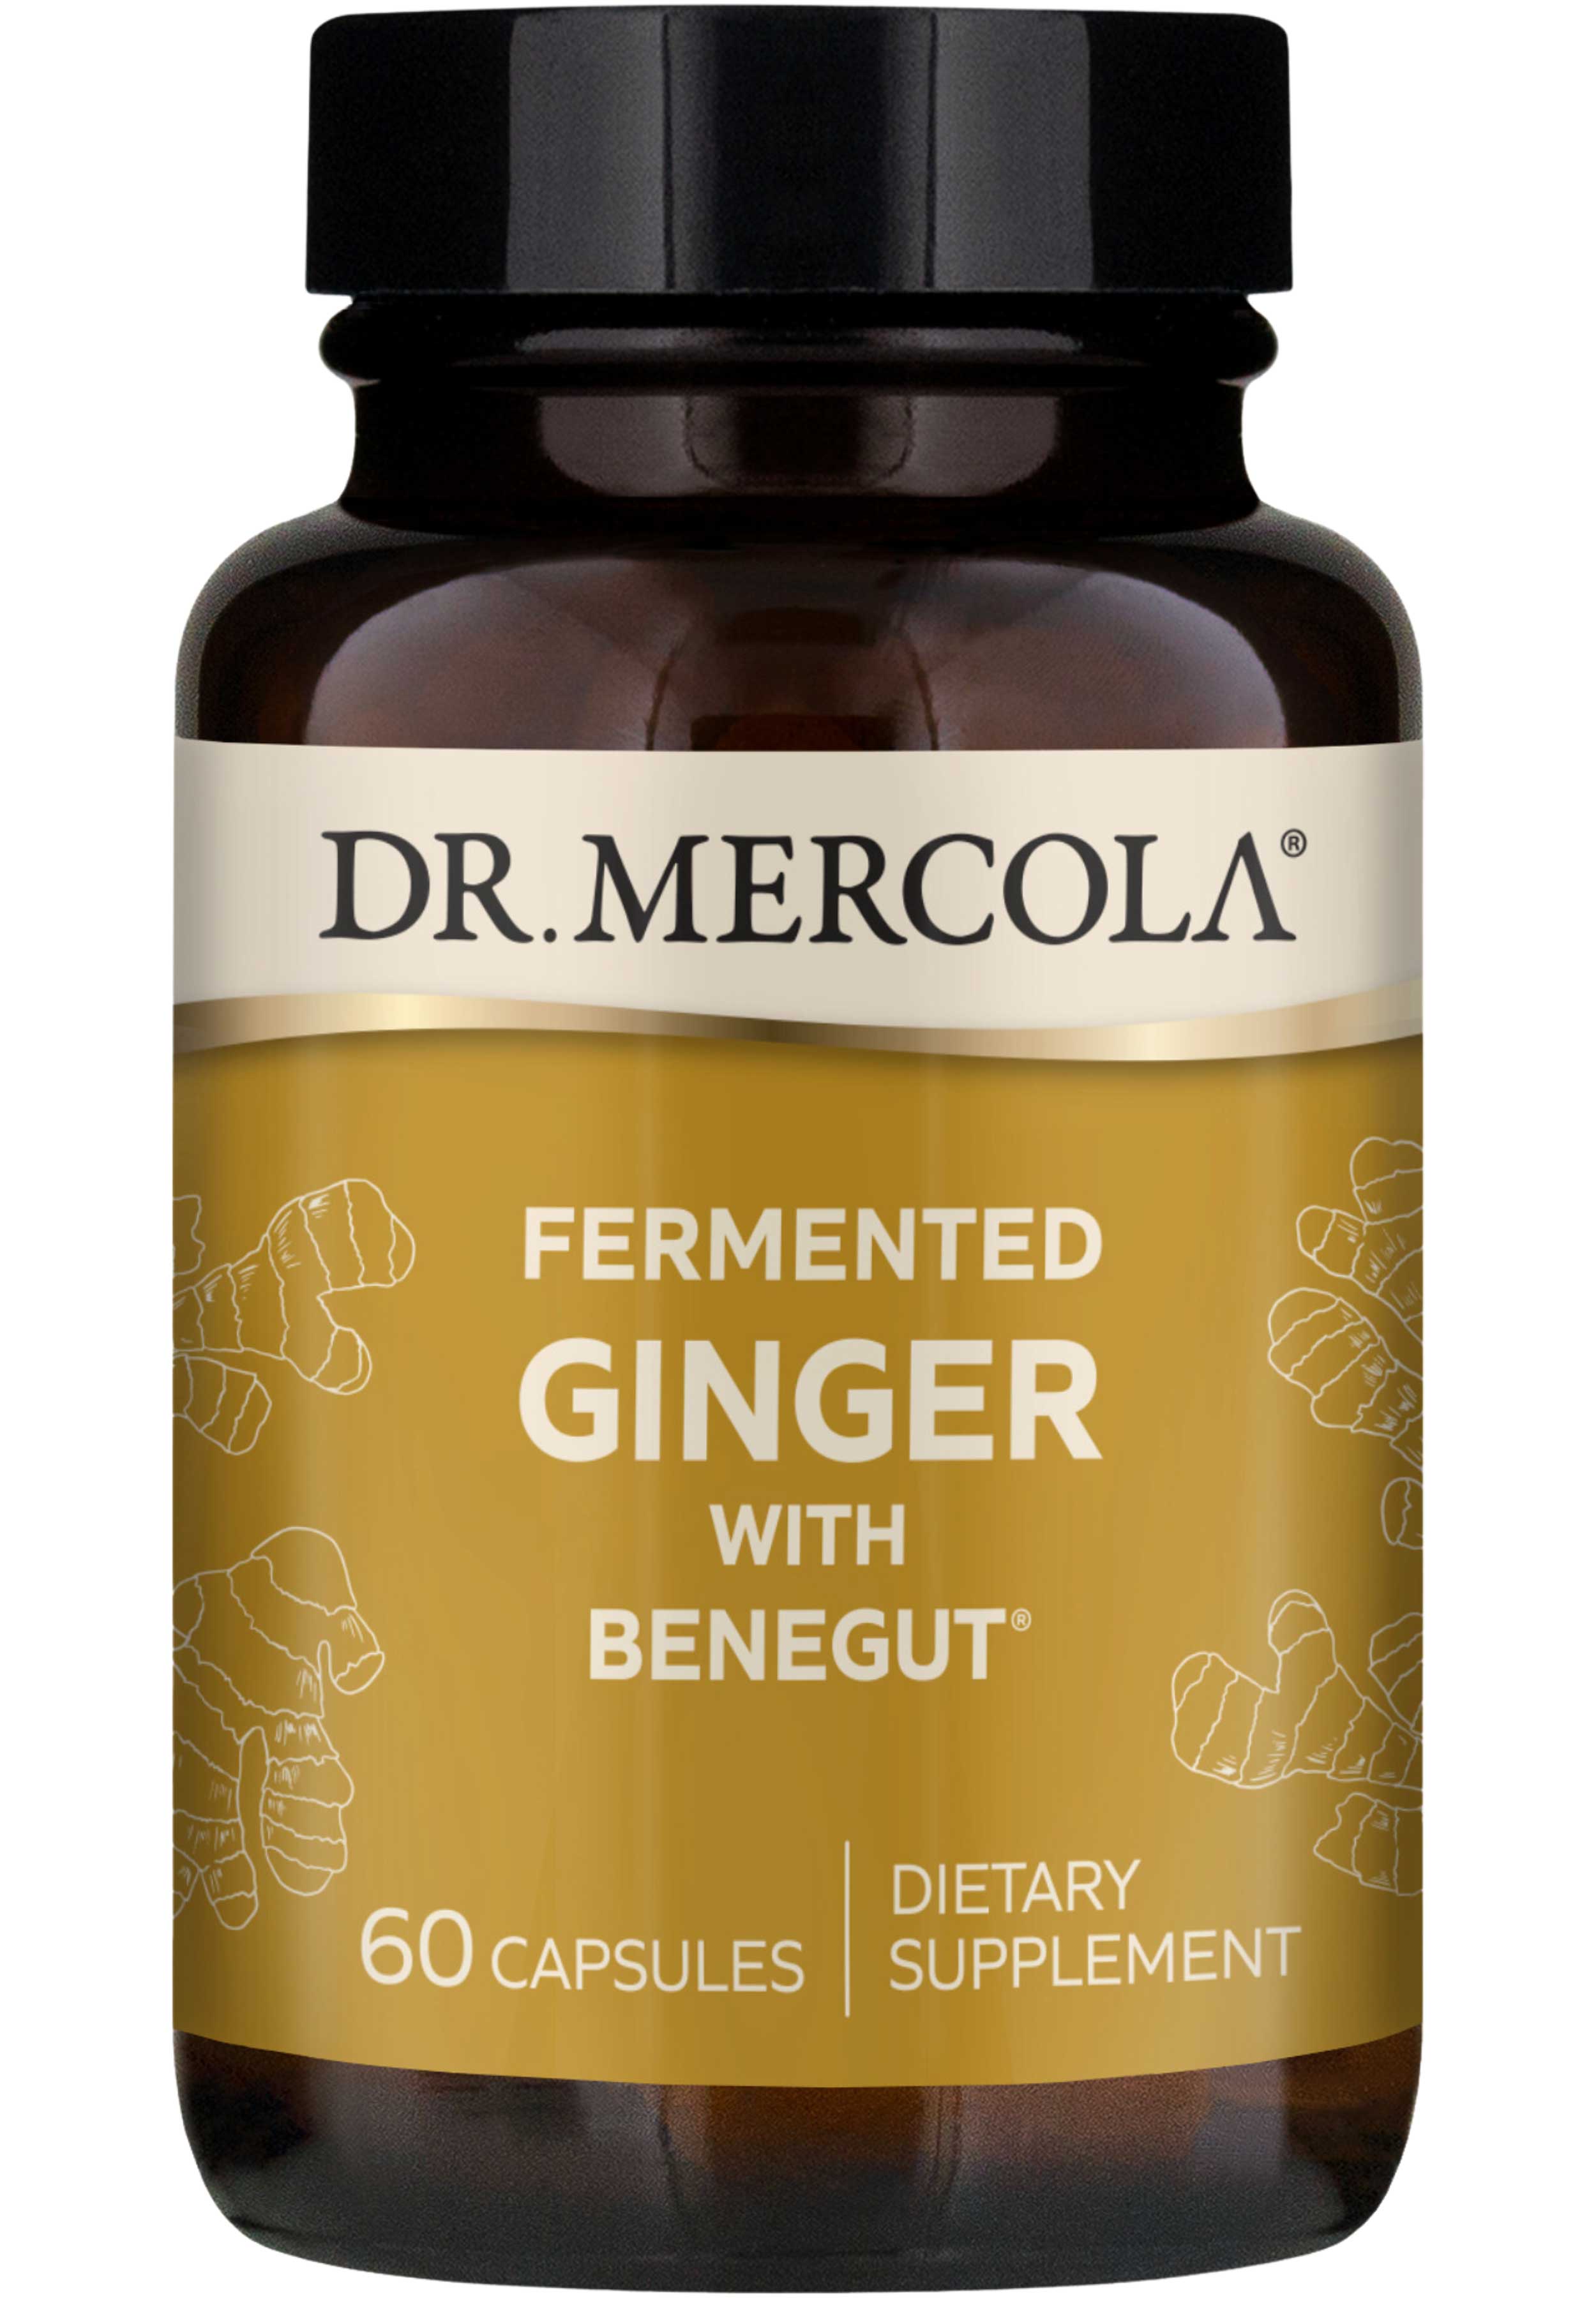 Dr. Mercola Fermented Ginger with Benegut